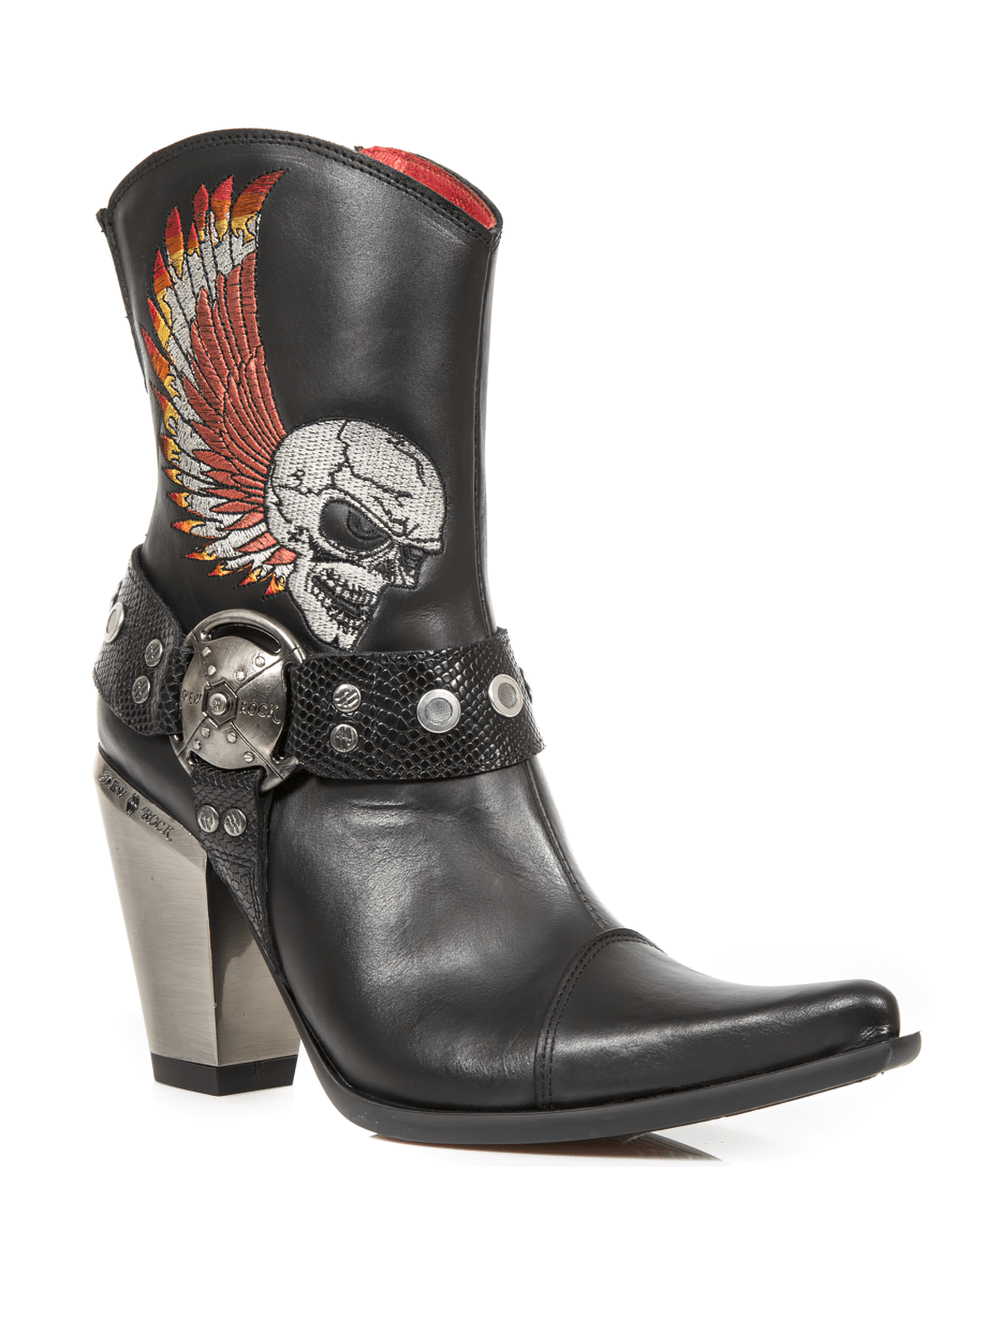 NEW ROCK Urban Style Leather Ankle Boots with Skull Design